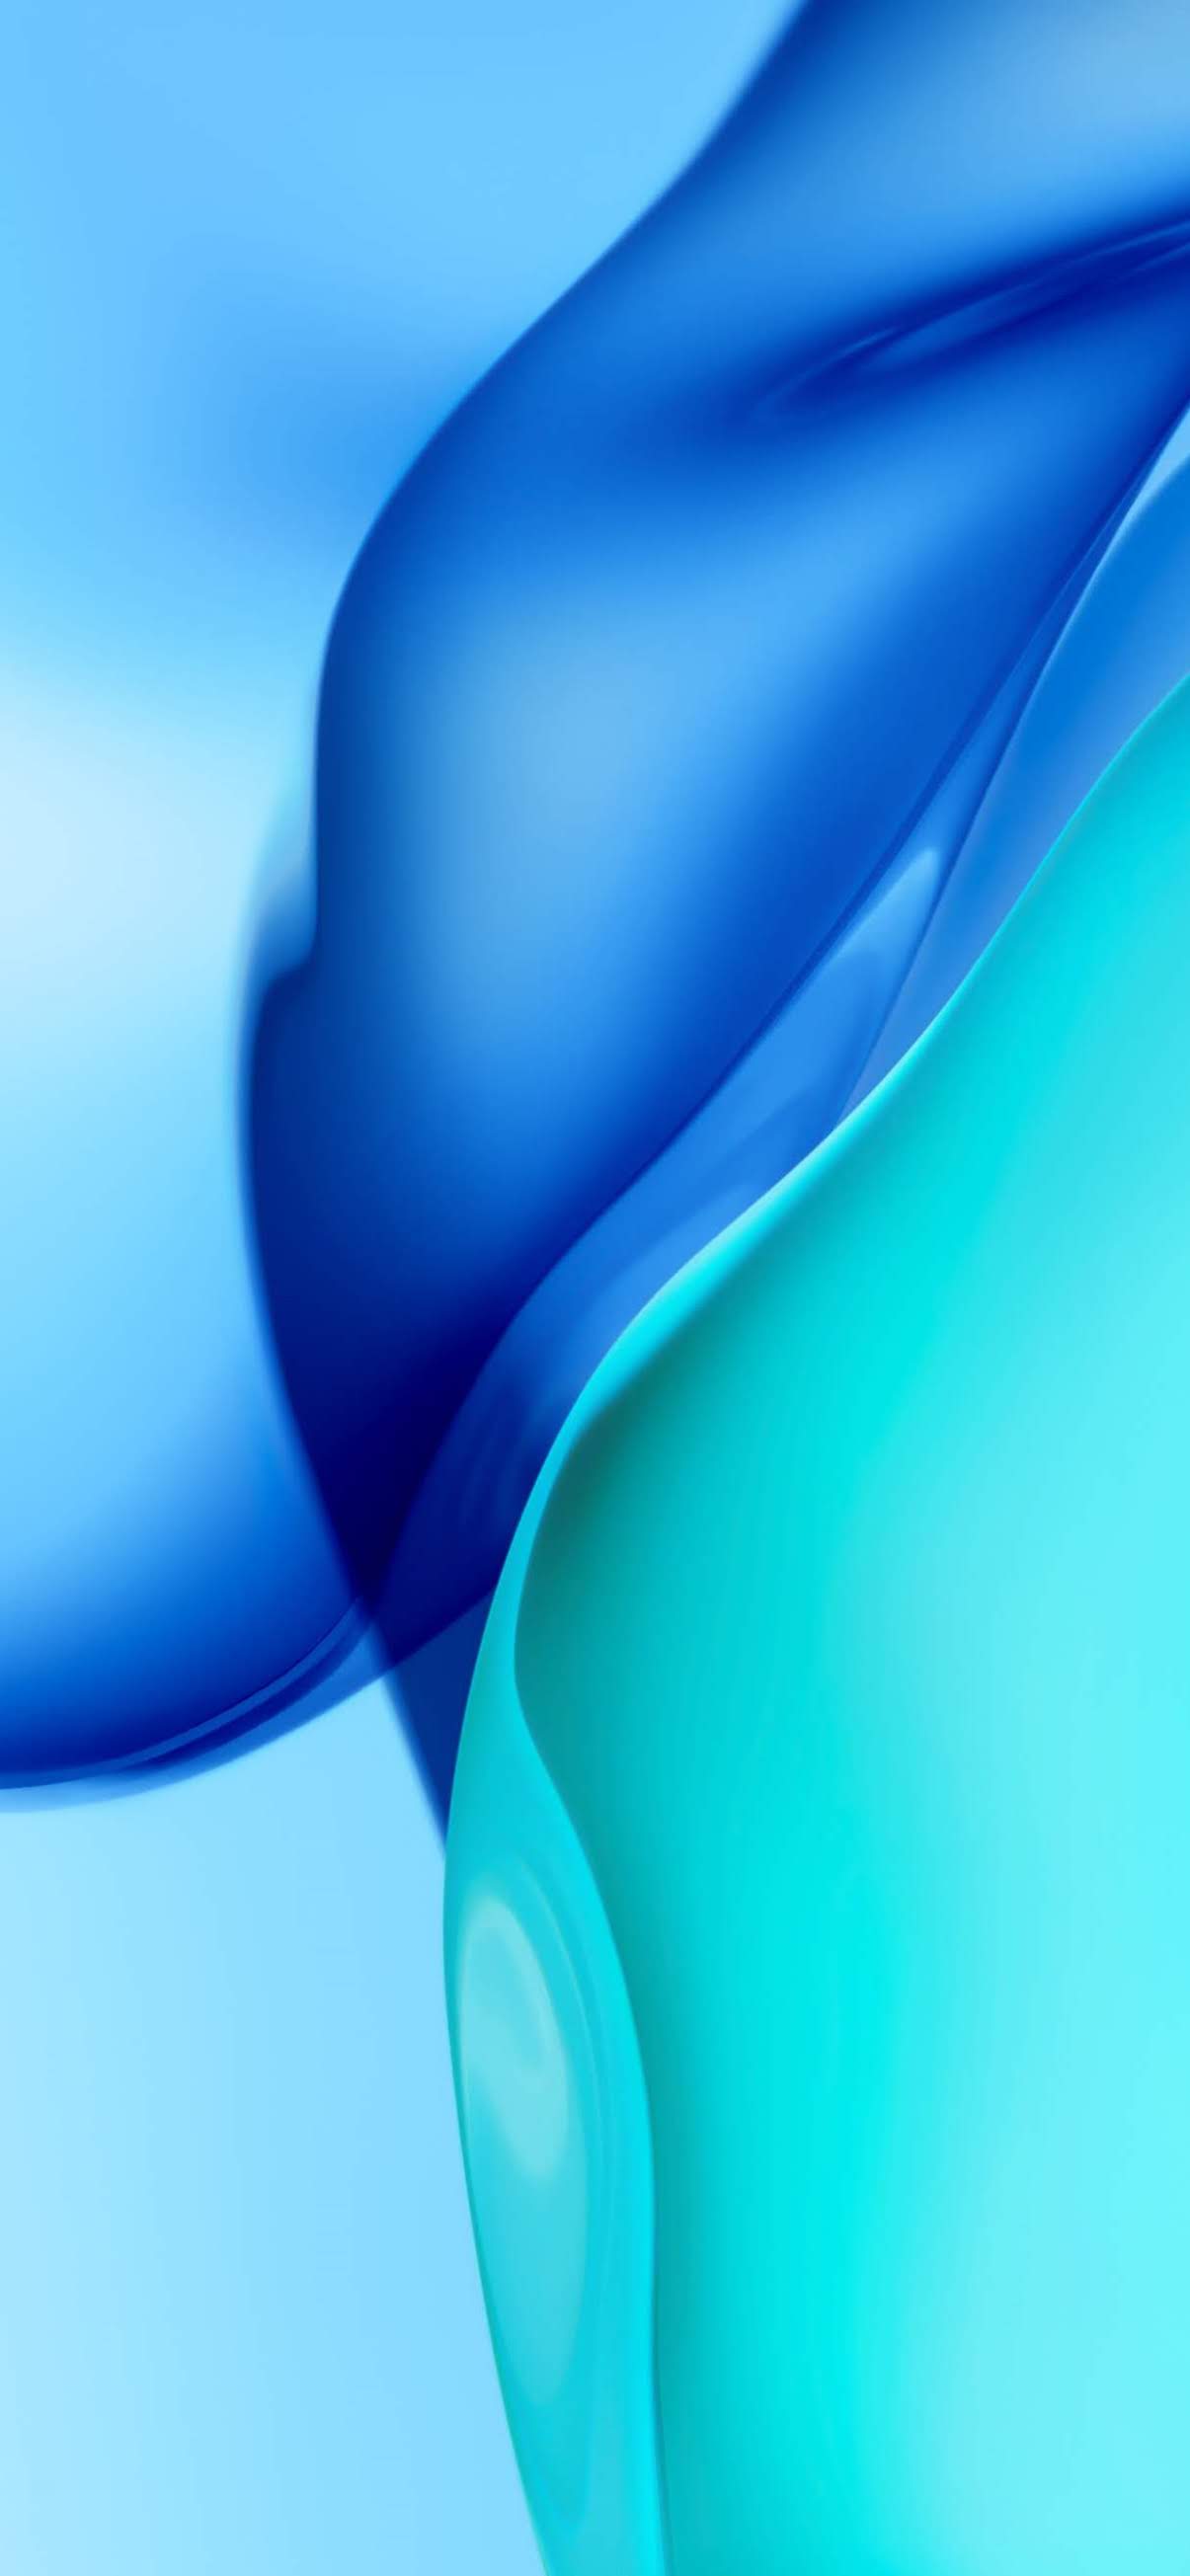 Wallpapers iPhone 11 Pro Max - Pack 1 - WallsPhone